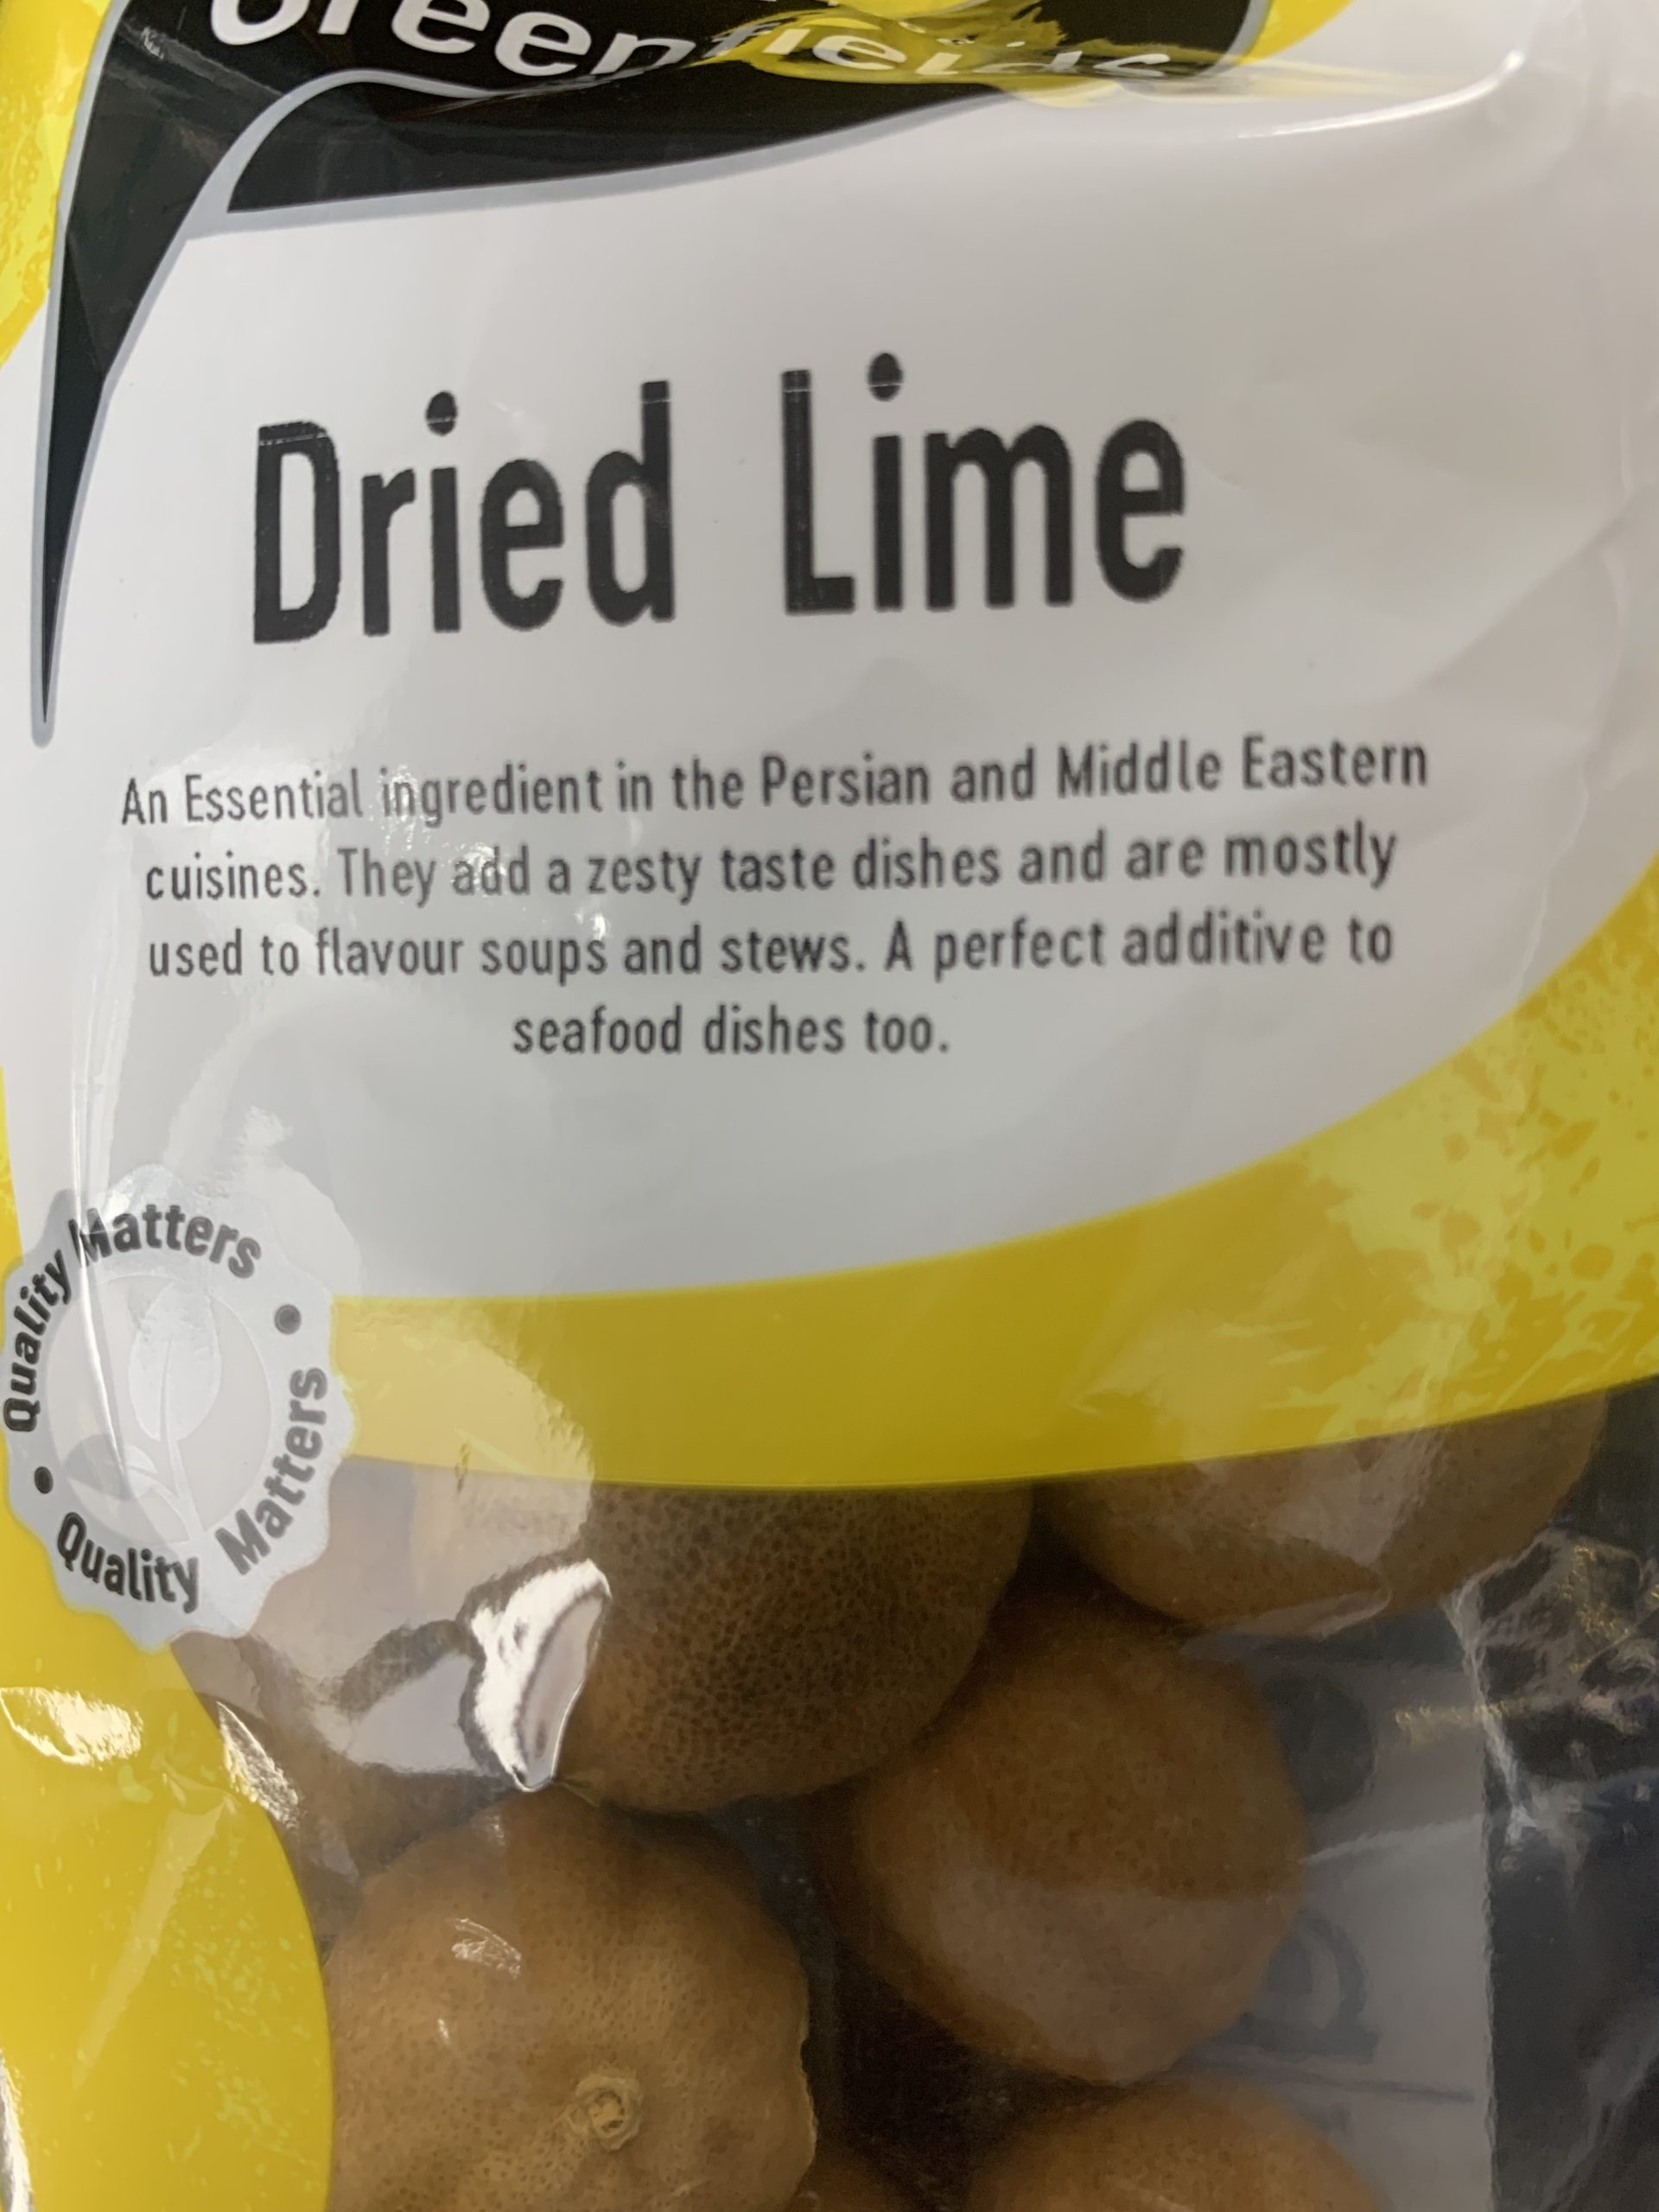 Greenfields Dried Lime 60g